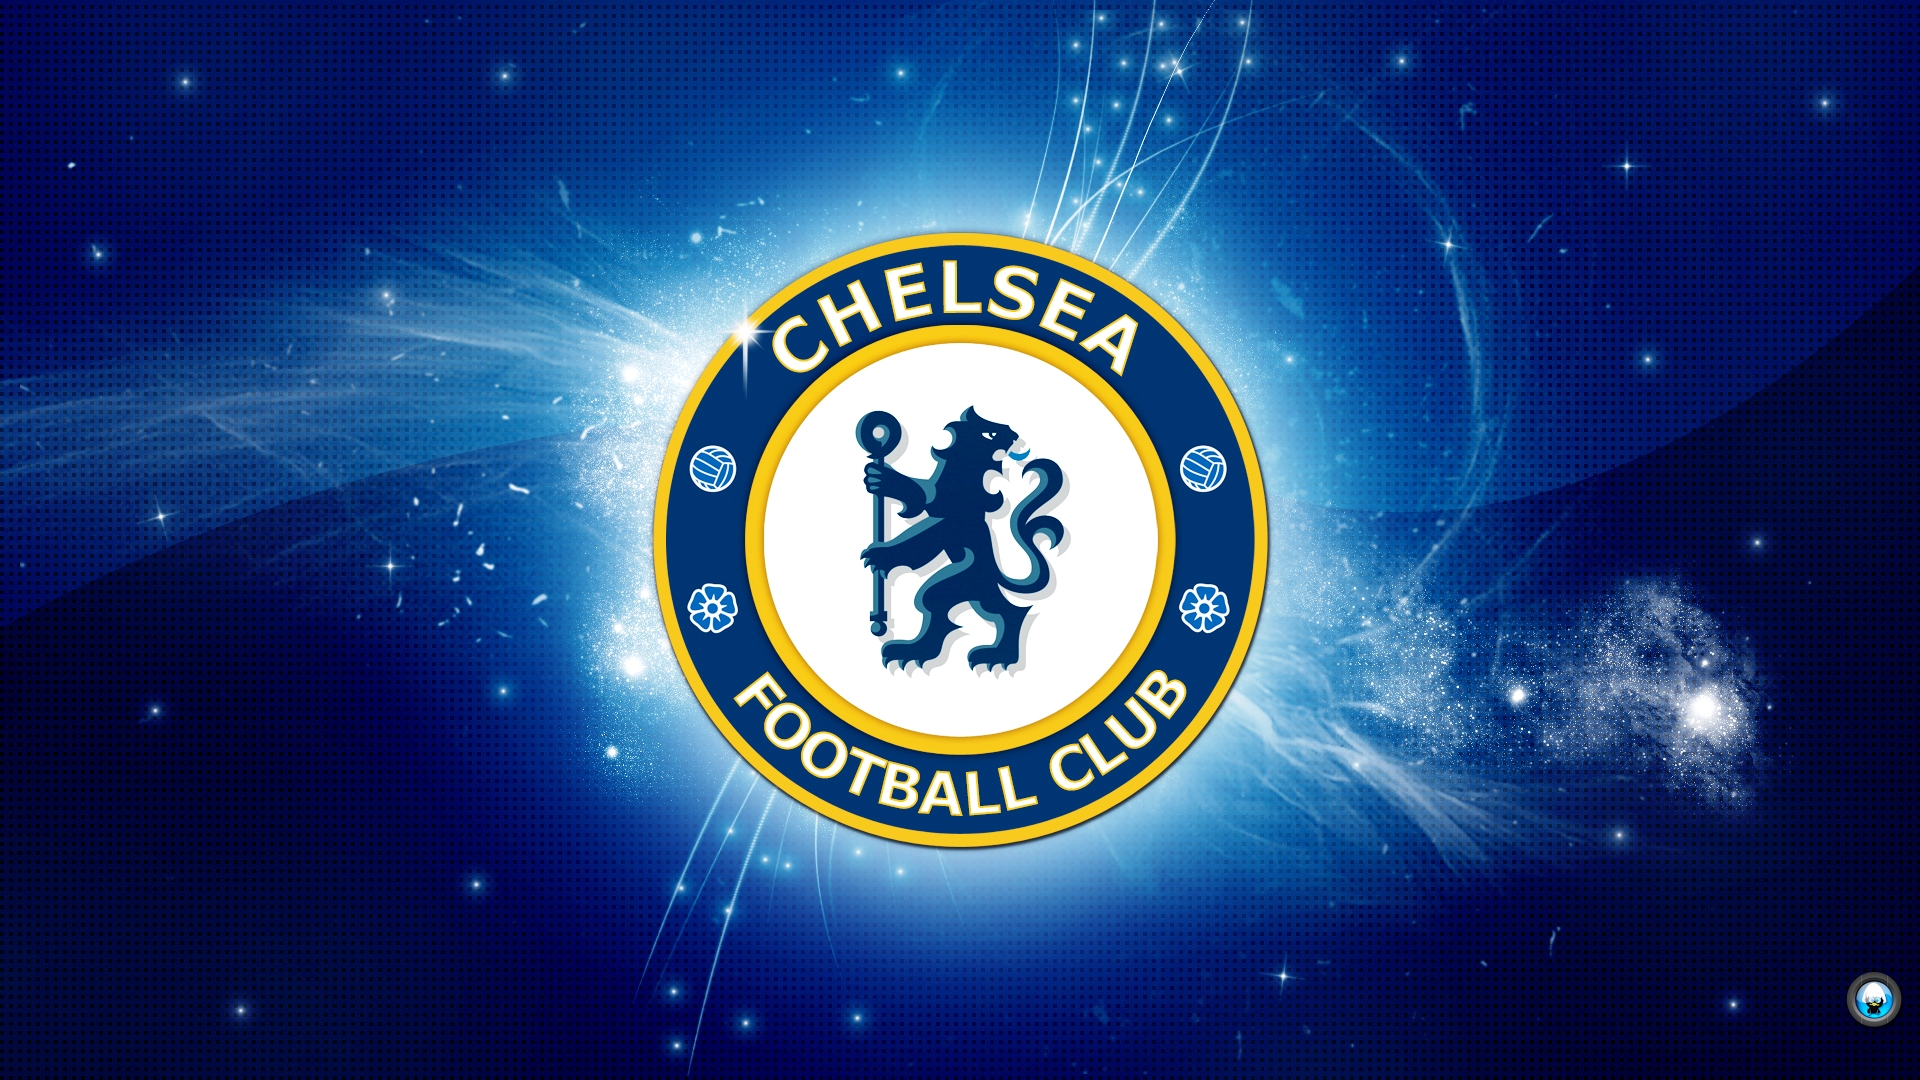 Download this Chelsea picture